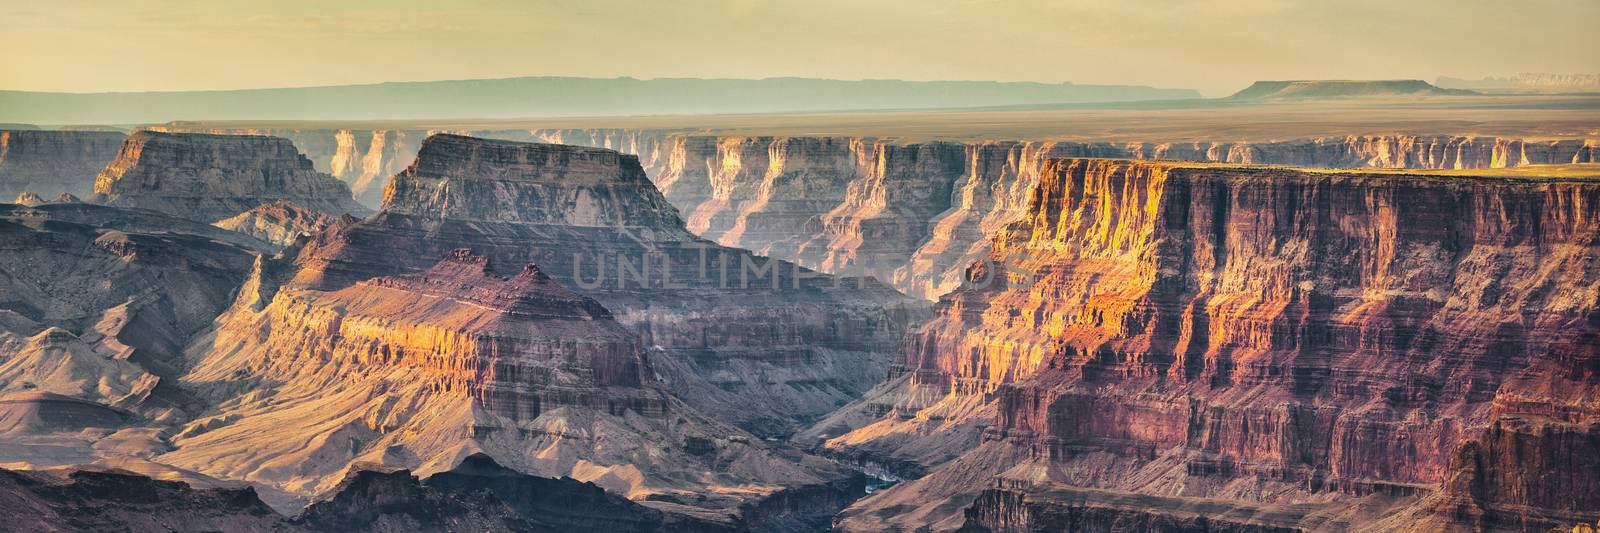 Grand Canyon banner nature landscape steep cliffs at sunset dusk panoramic background.